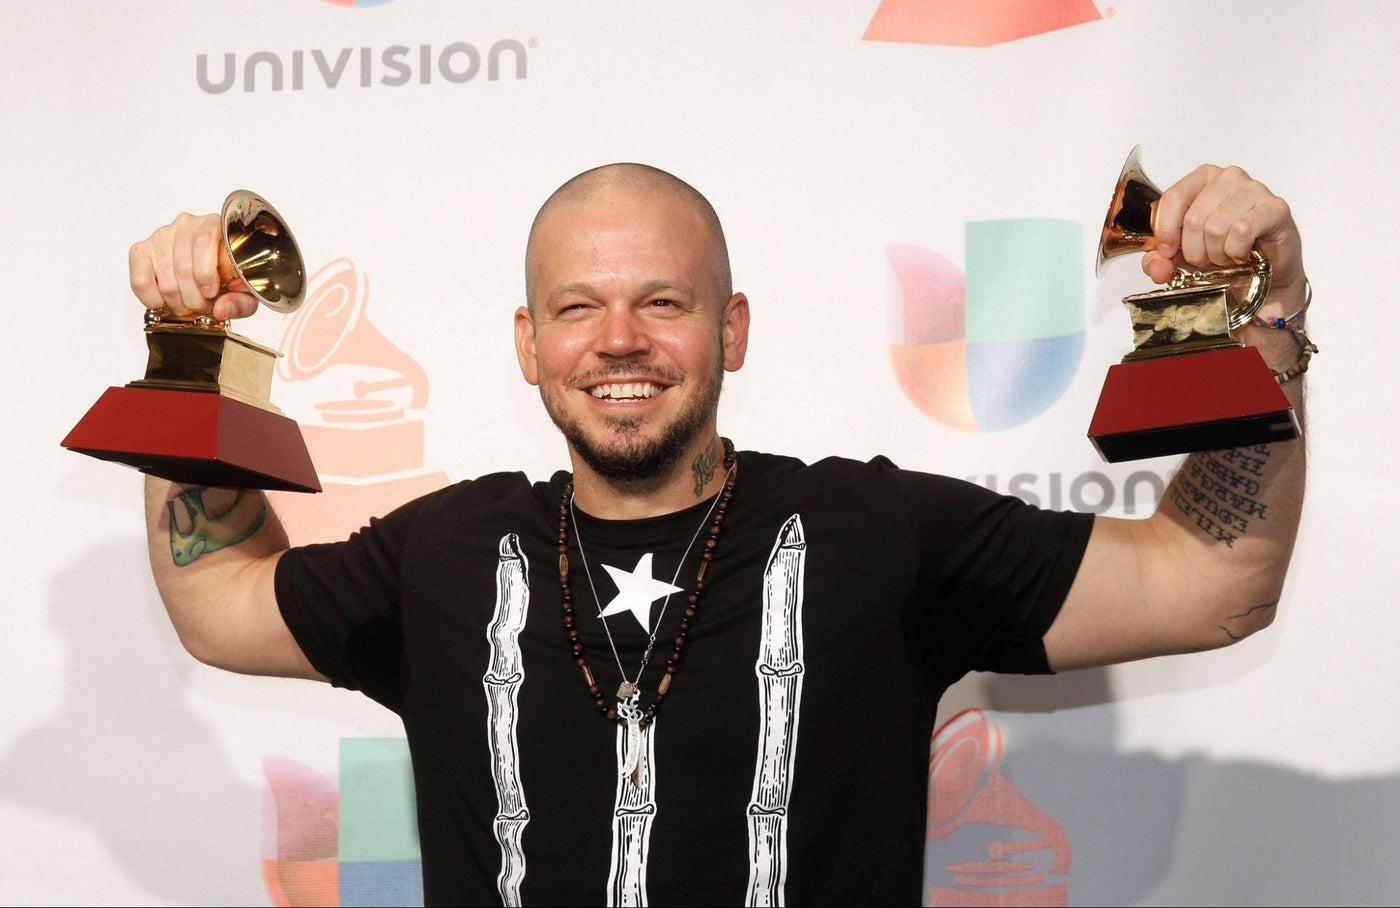 Puerto Rican rapper, Resident, holding a Latin Grammy Award in each hand